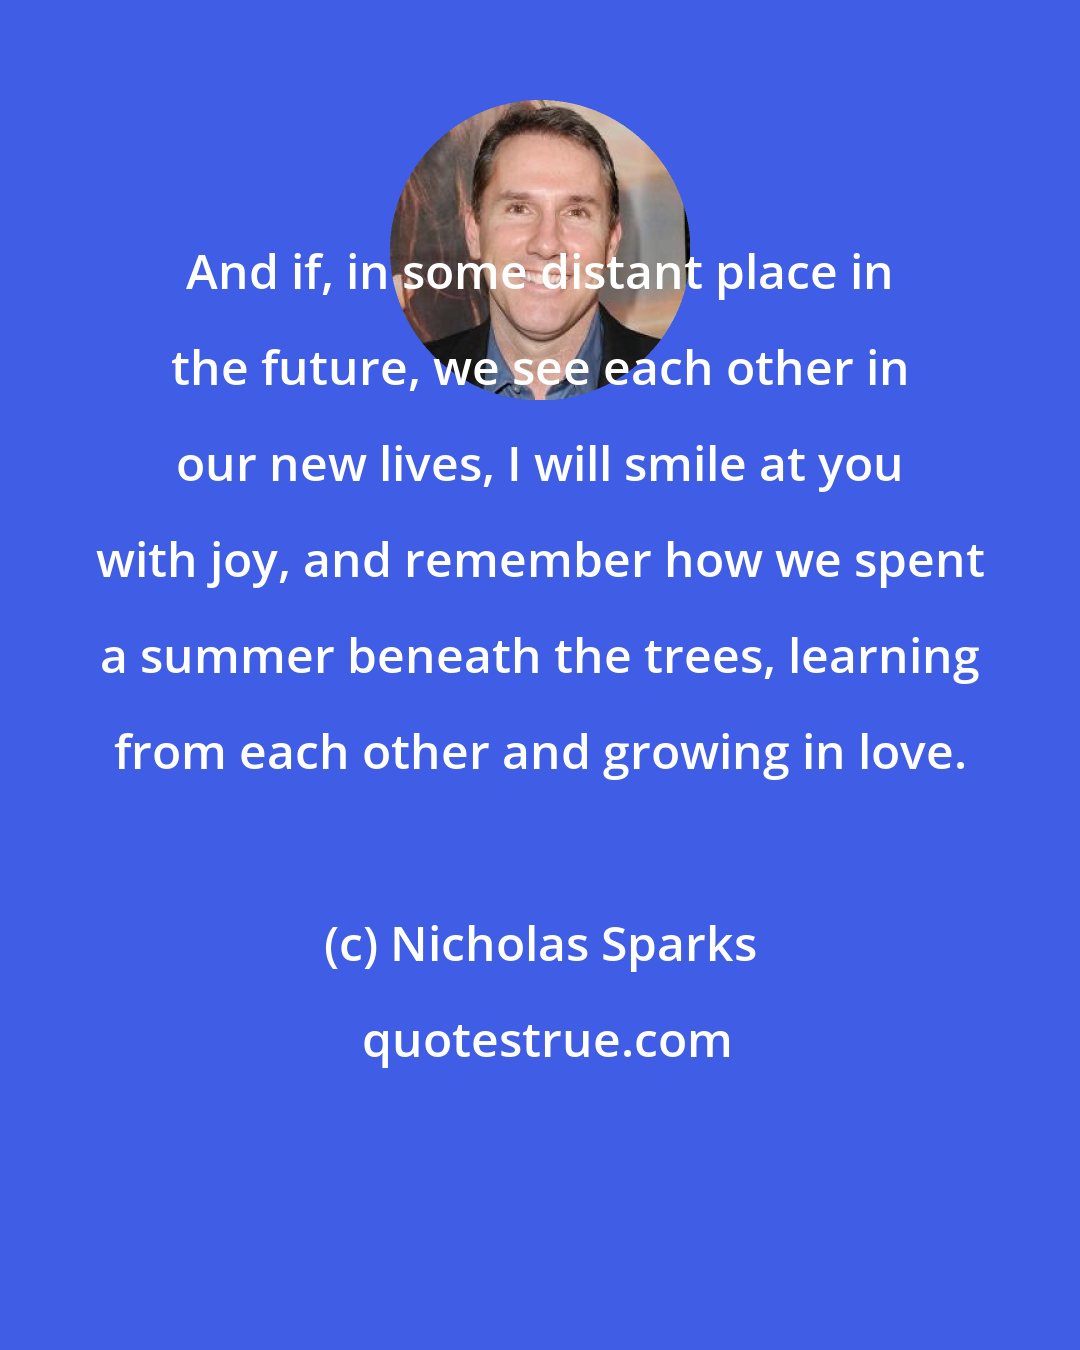 Nicholas Sparks: And if, in some distant place in the future, we see each other in our new lives, I will smile at you with joy, and remember how we spent a summer beneath the trees, learning from each other and growing in love.